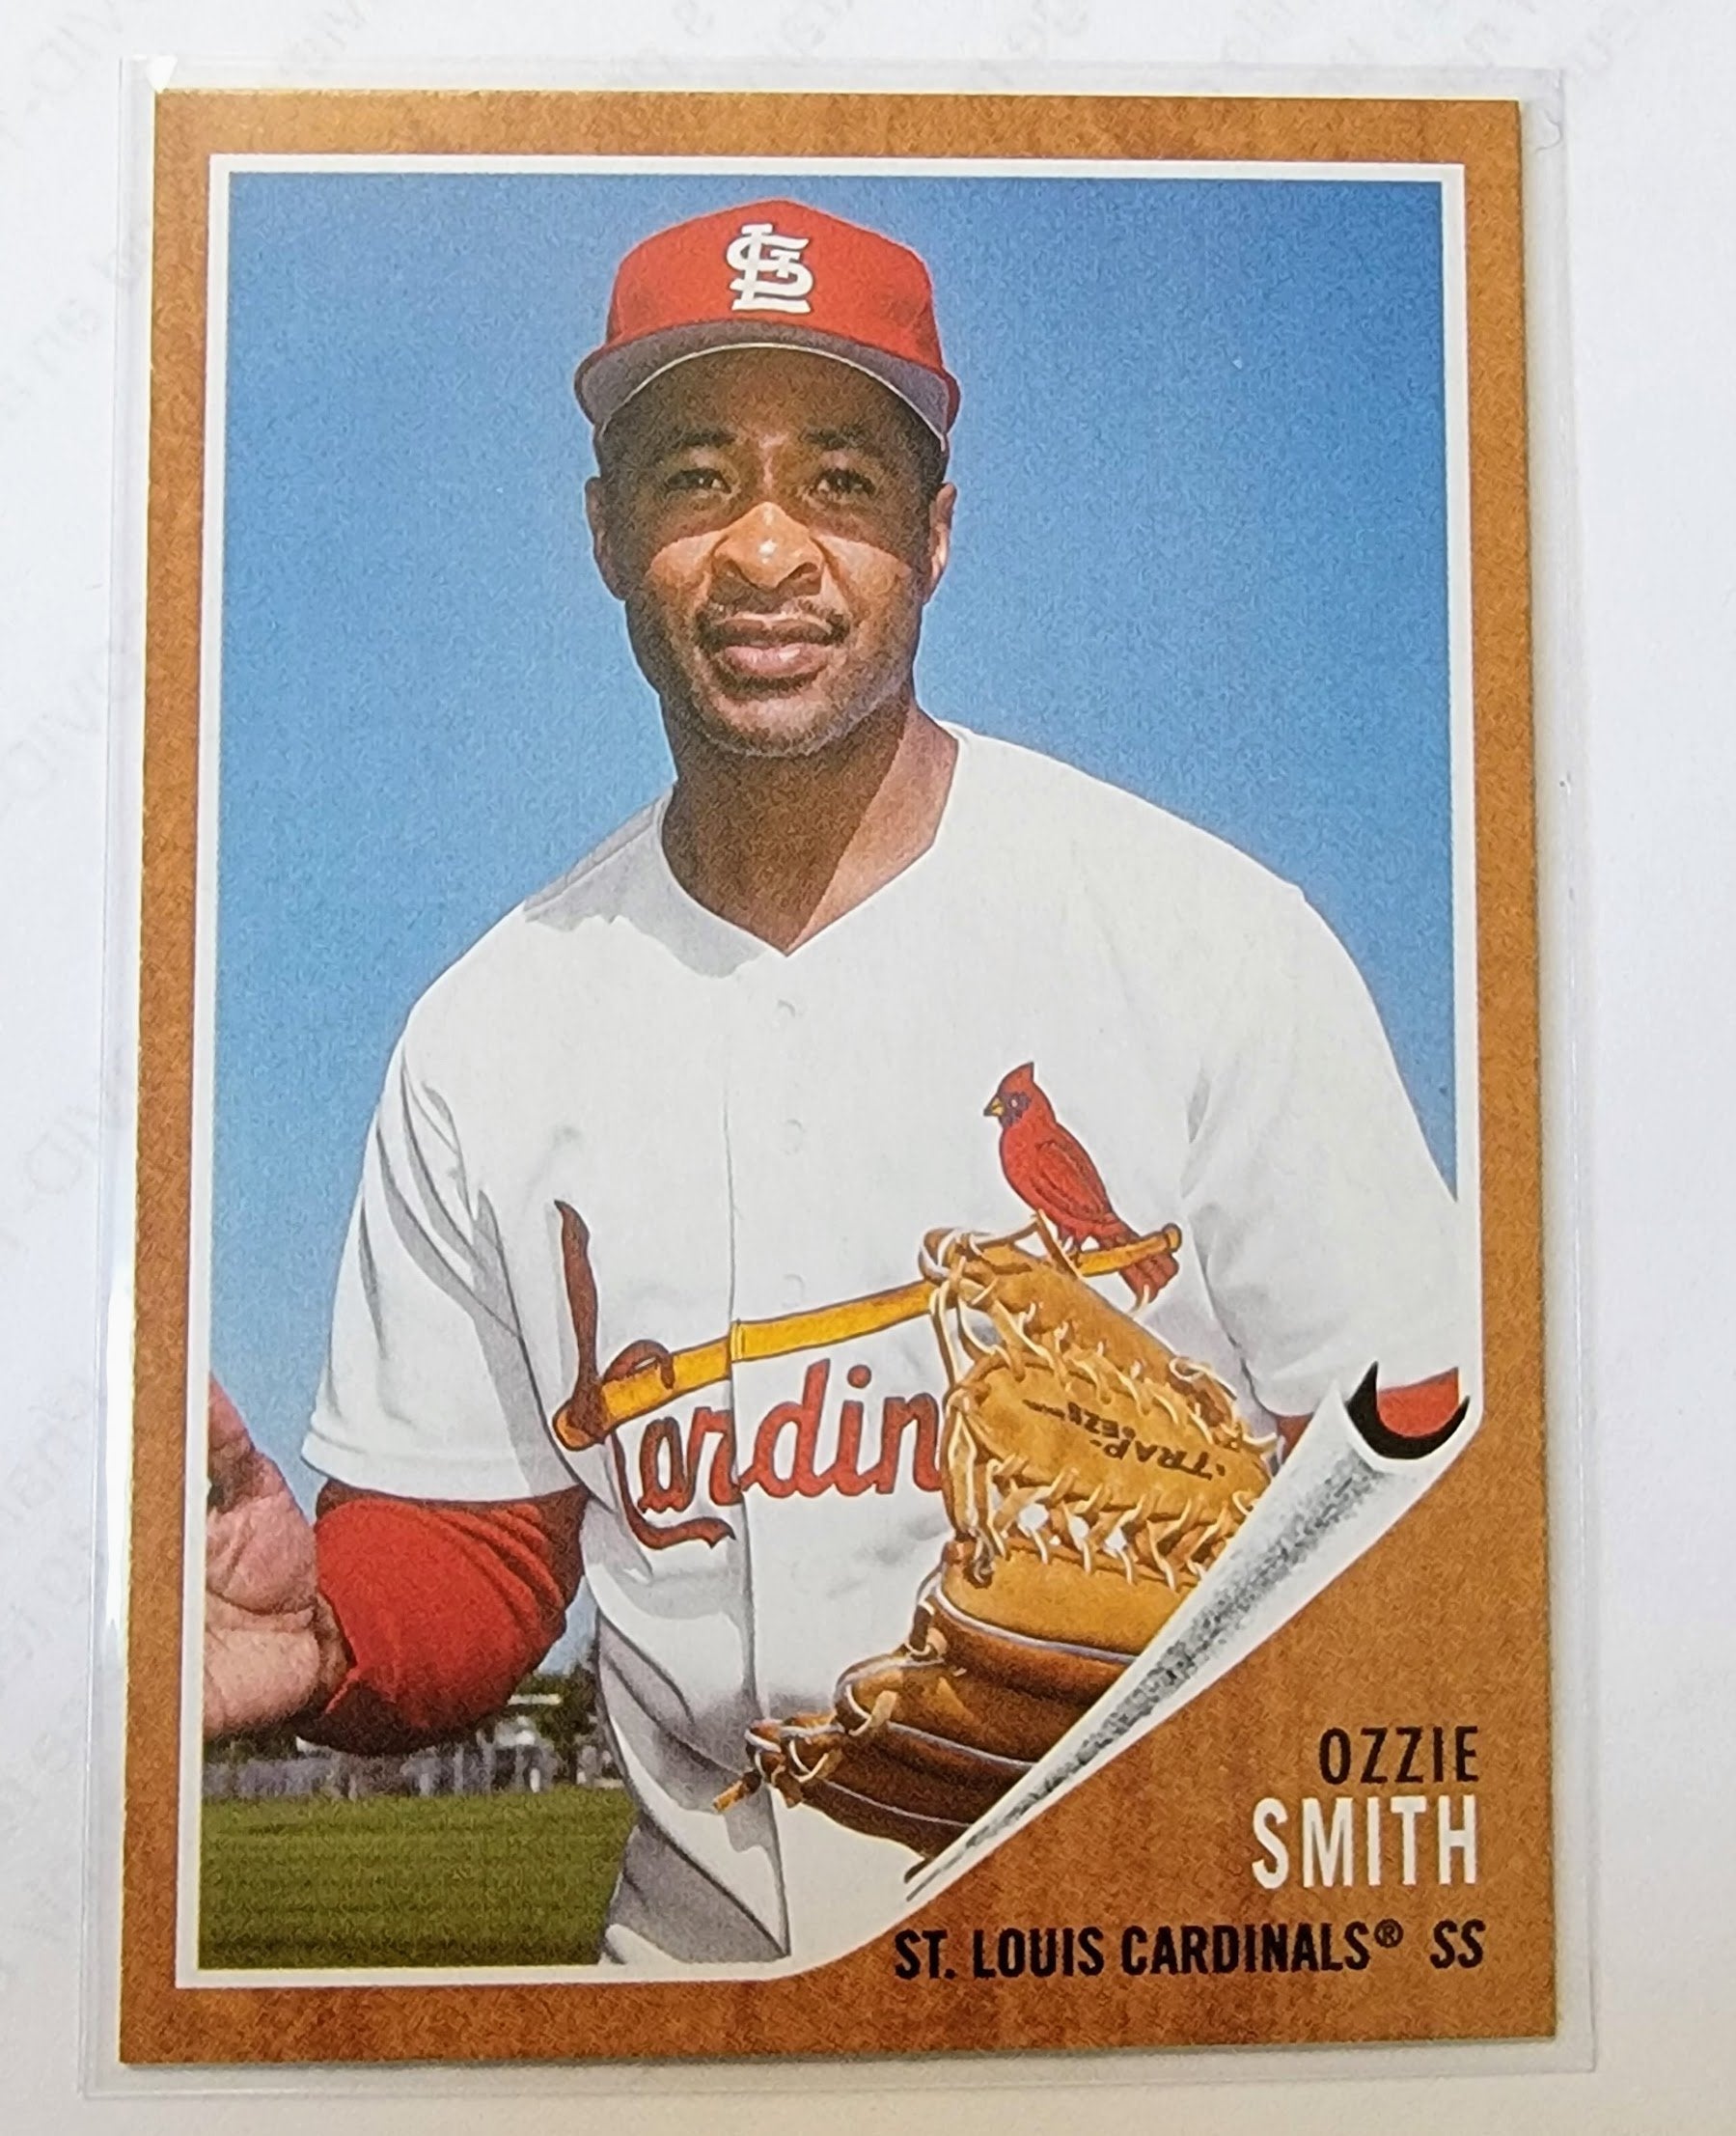 2021 Topps Archives Ozzie Smith 1962 Baseball Trading Card SMCB1 simple Xclusive Collectibles   